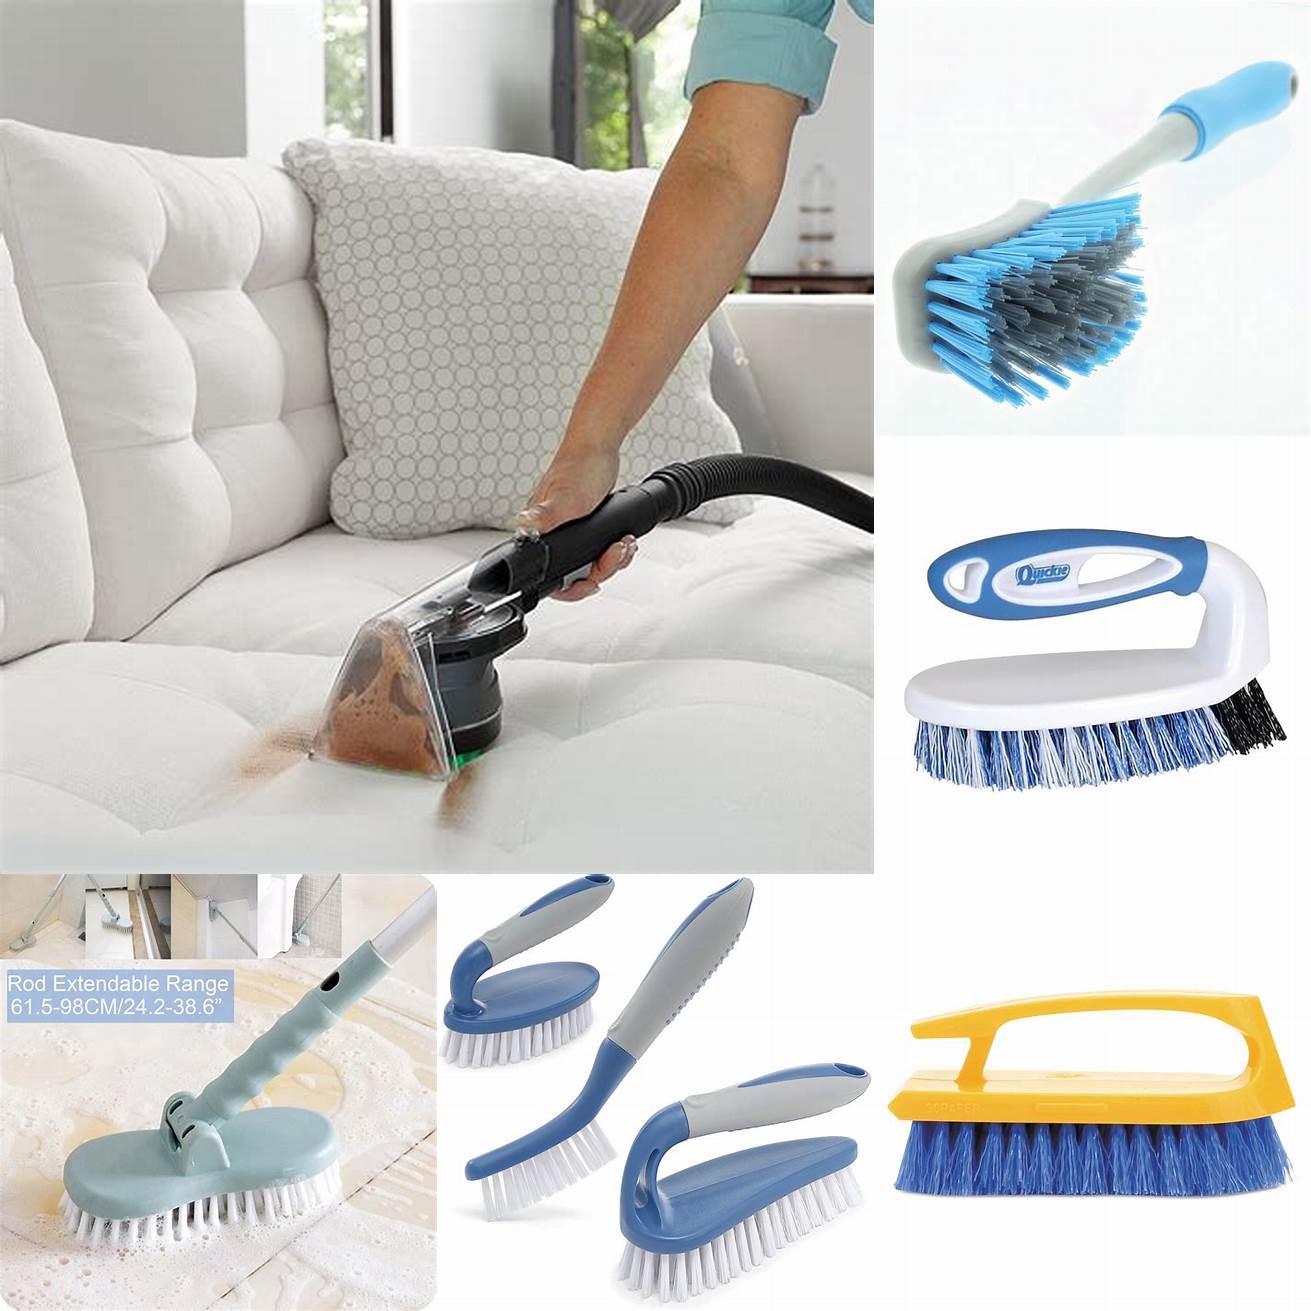 An image of the scrub brush being used on the furniture